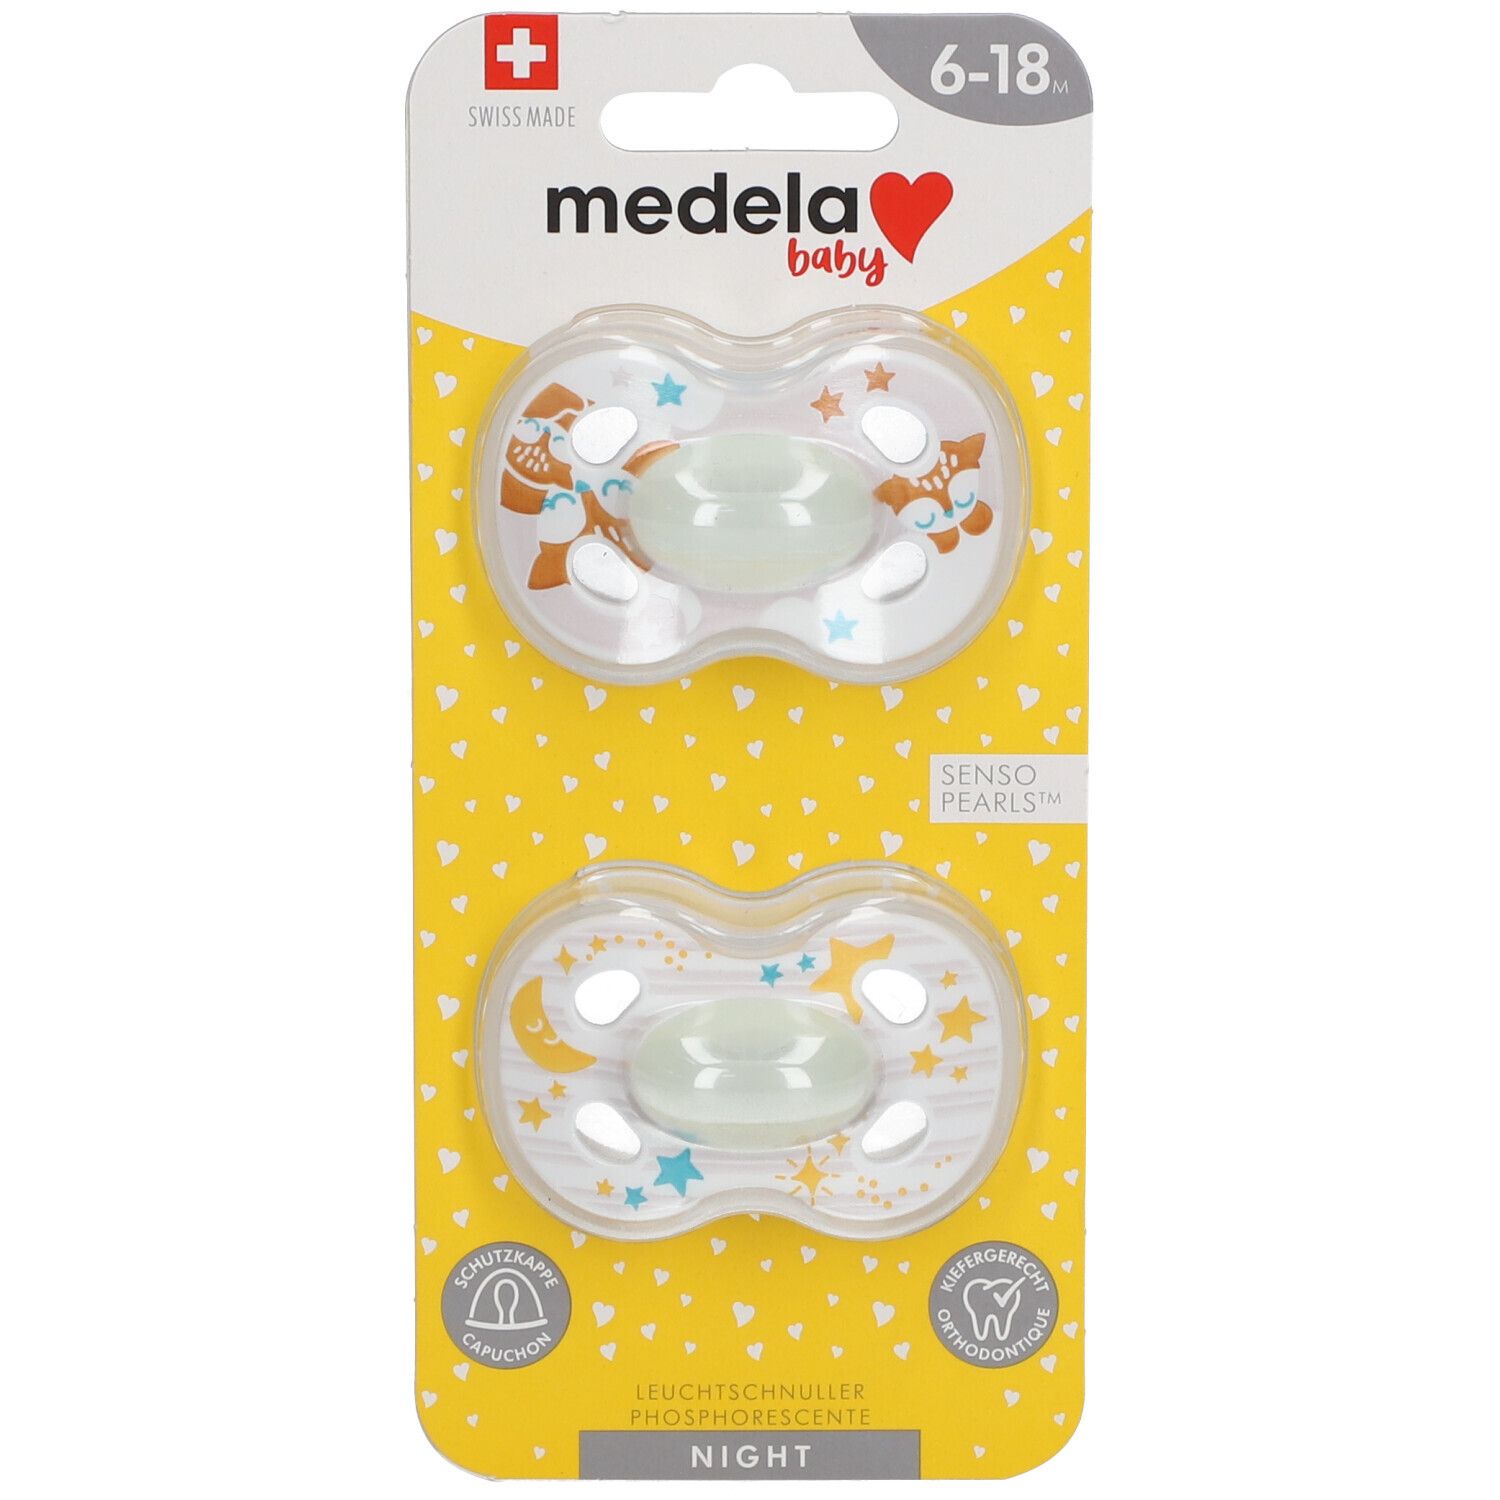 Medela Baby Night & Night Sucette 6-18 Mois DUO 2 tétine